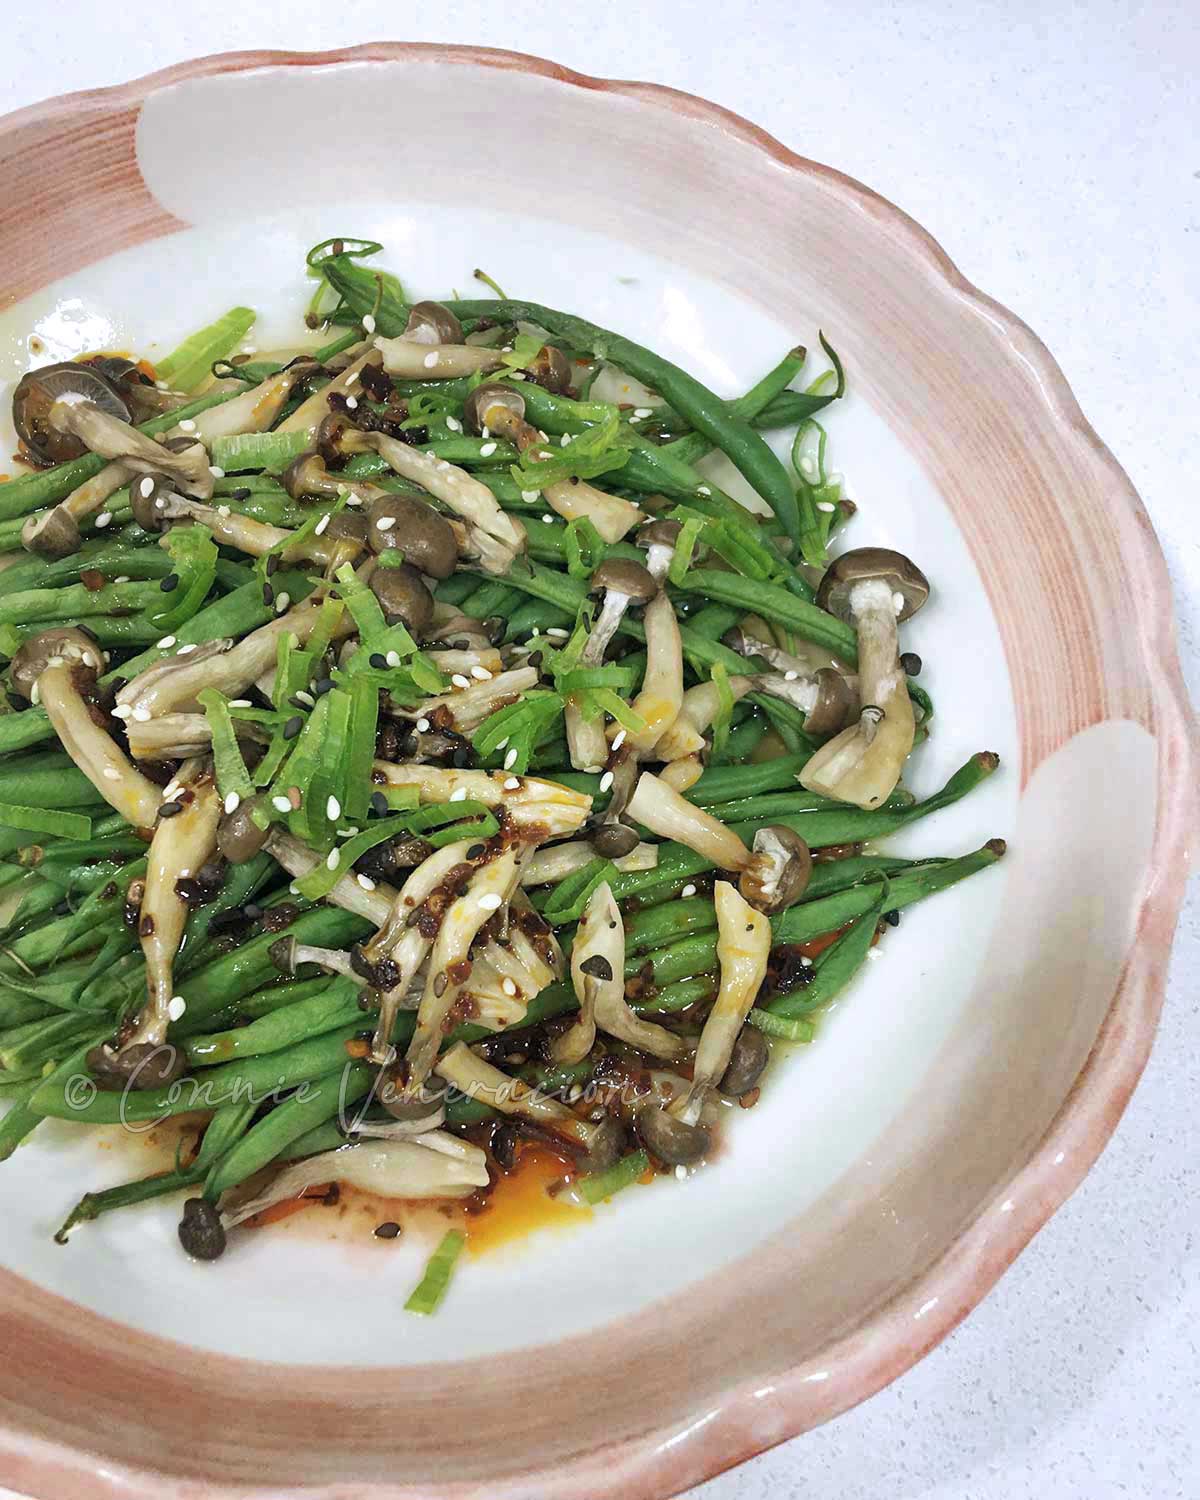 Green beans and mushrooms with chili ginger vinaigrette